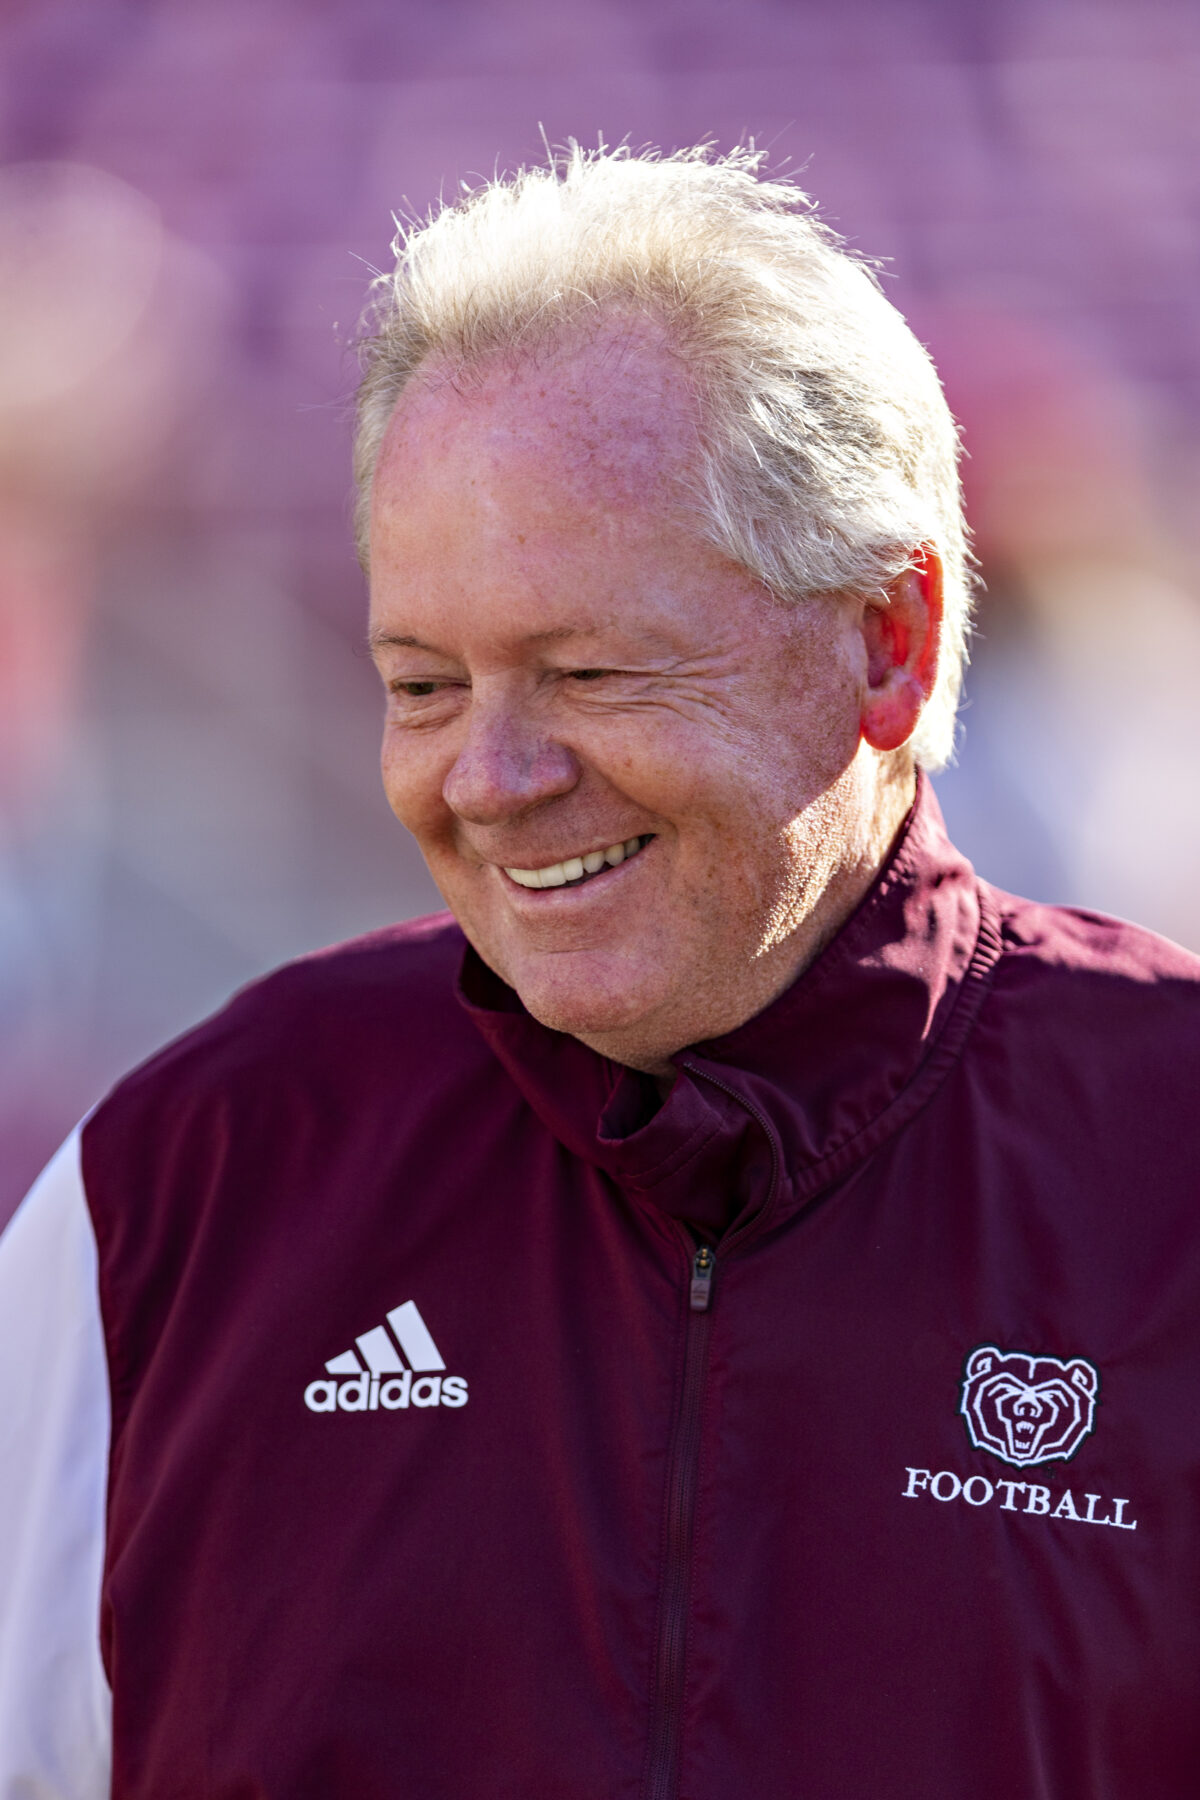 Petrino’s recent availability with Aggies sheds some light on past